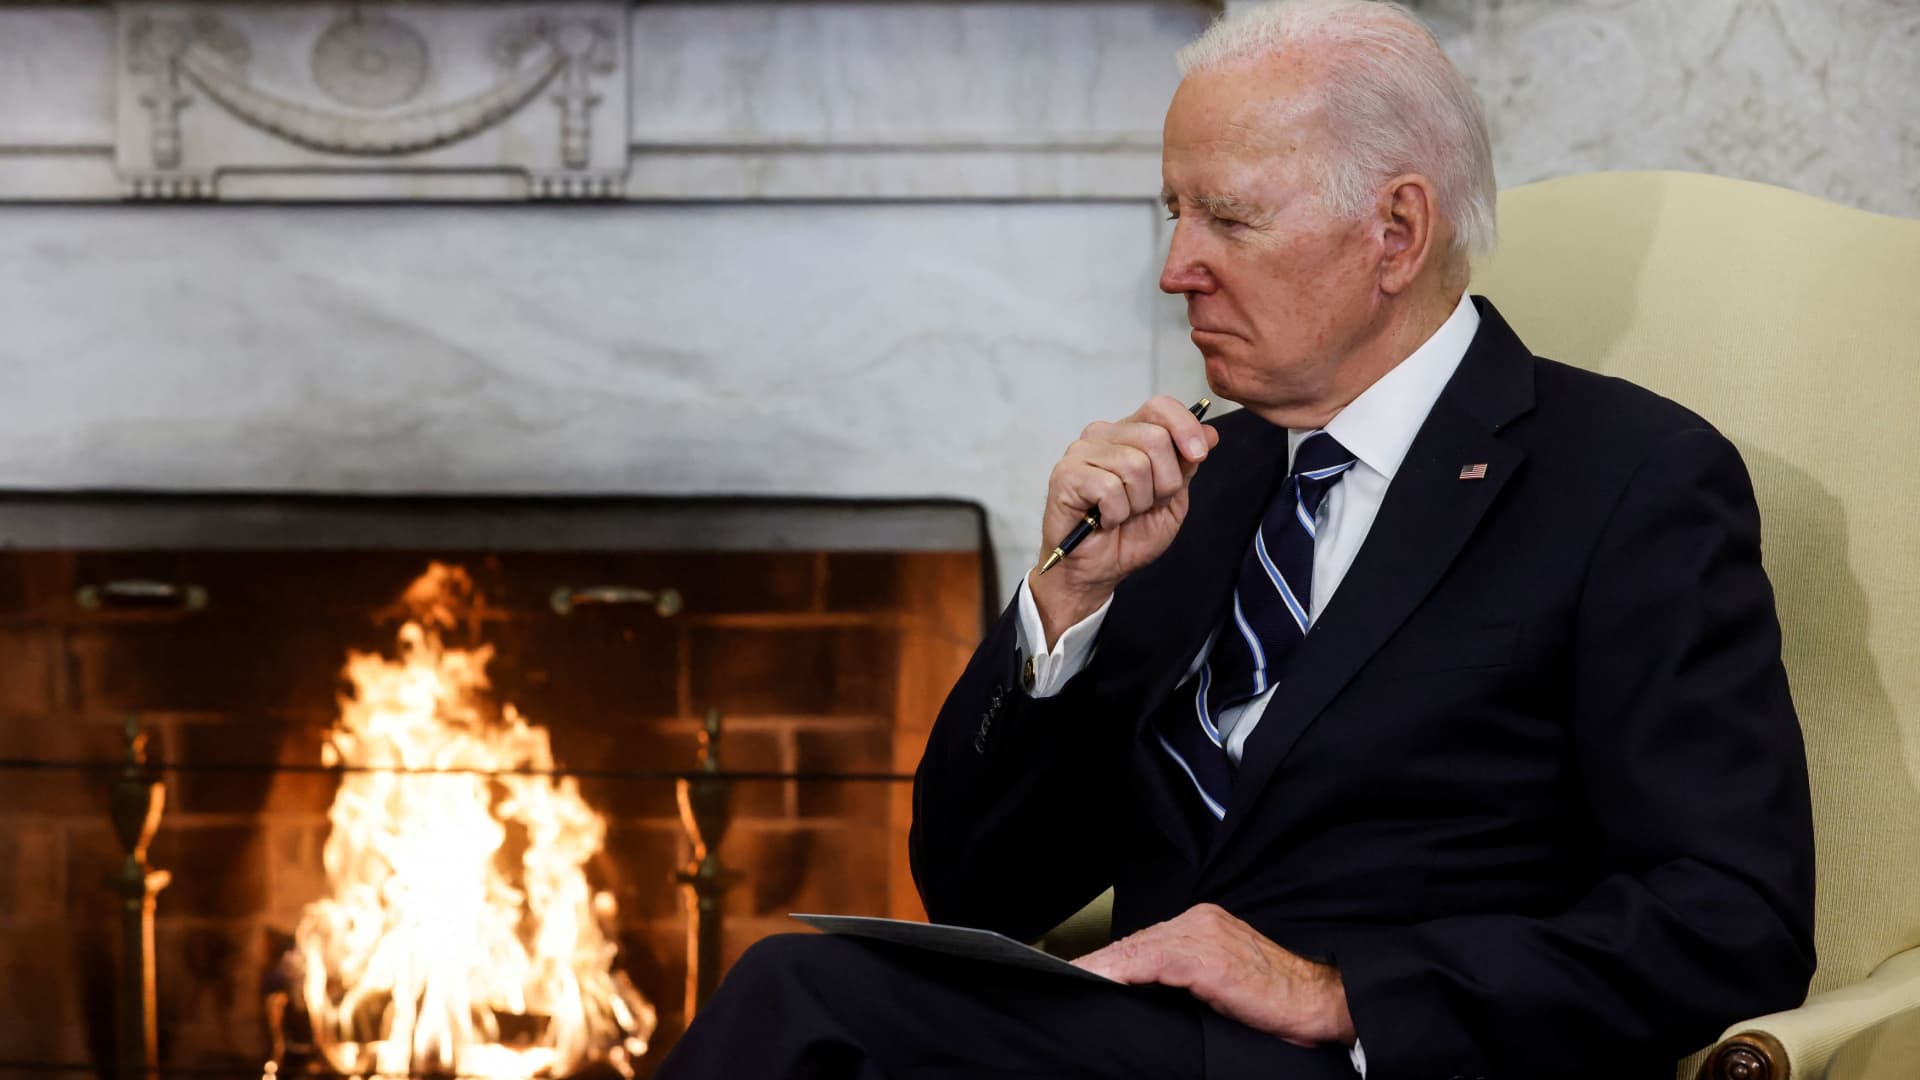 More classified documents found at Biden’s Delaware home, White House counsel says